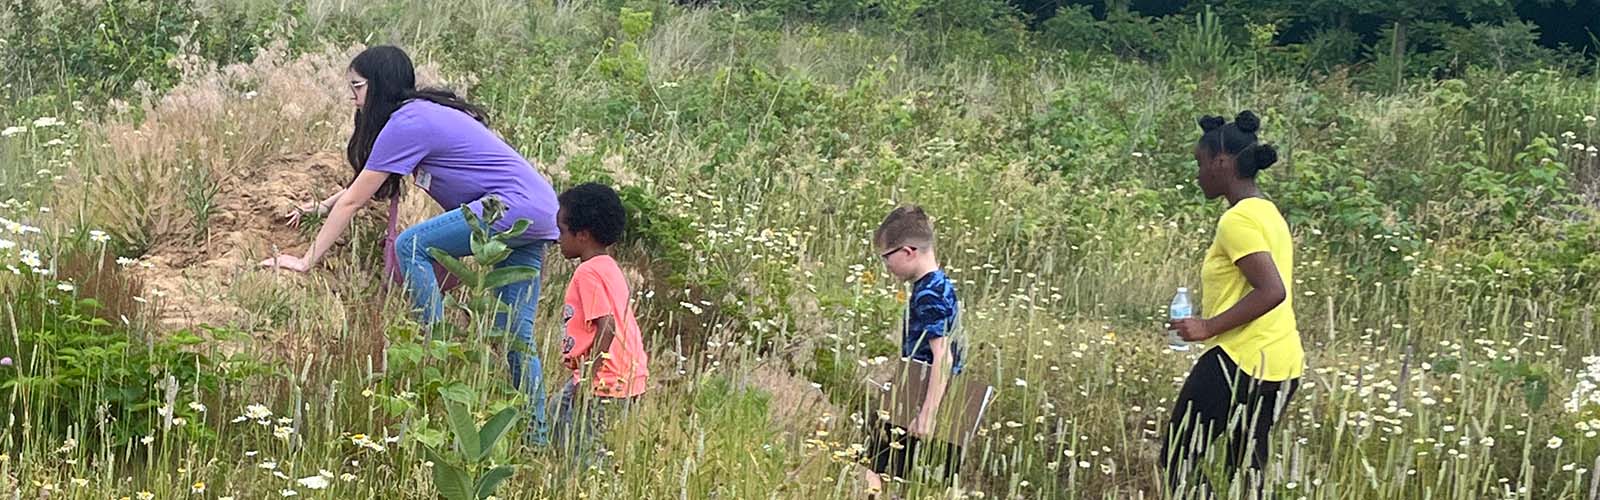 Sky's the Limit STEM camp participants walking through a prairie and climbing over large rocks